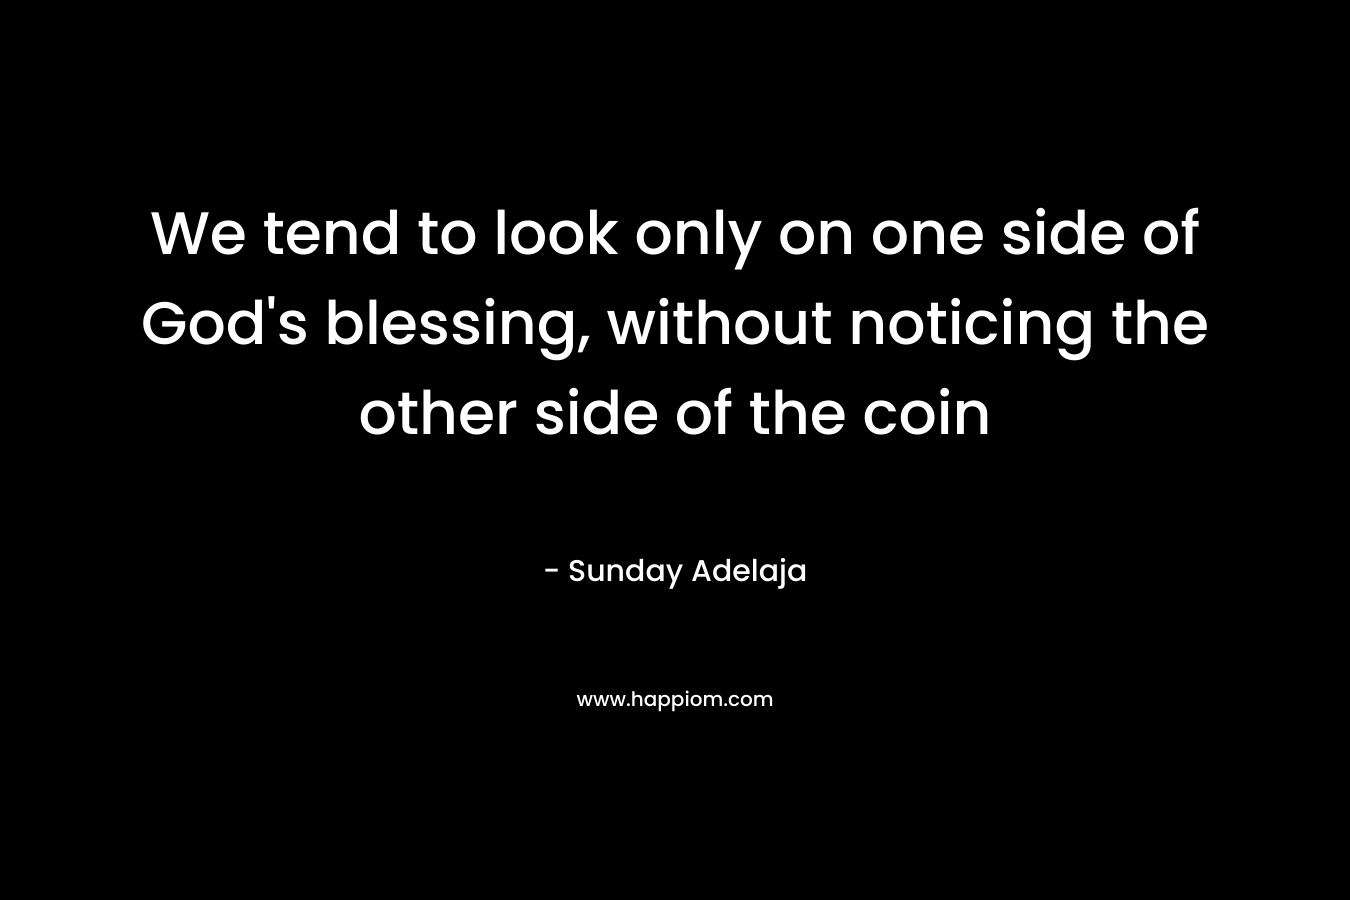 We tend to look only on one side of God’s blessing, without noticing the other side of the coin – Sunday Adelaja